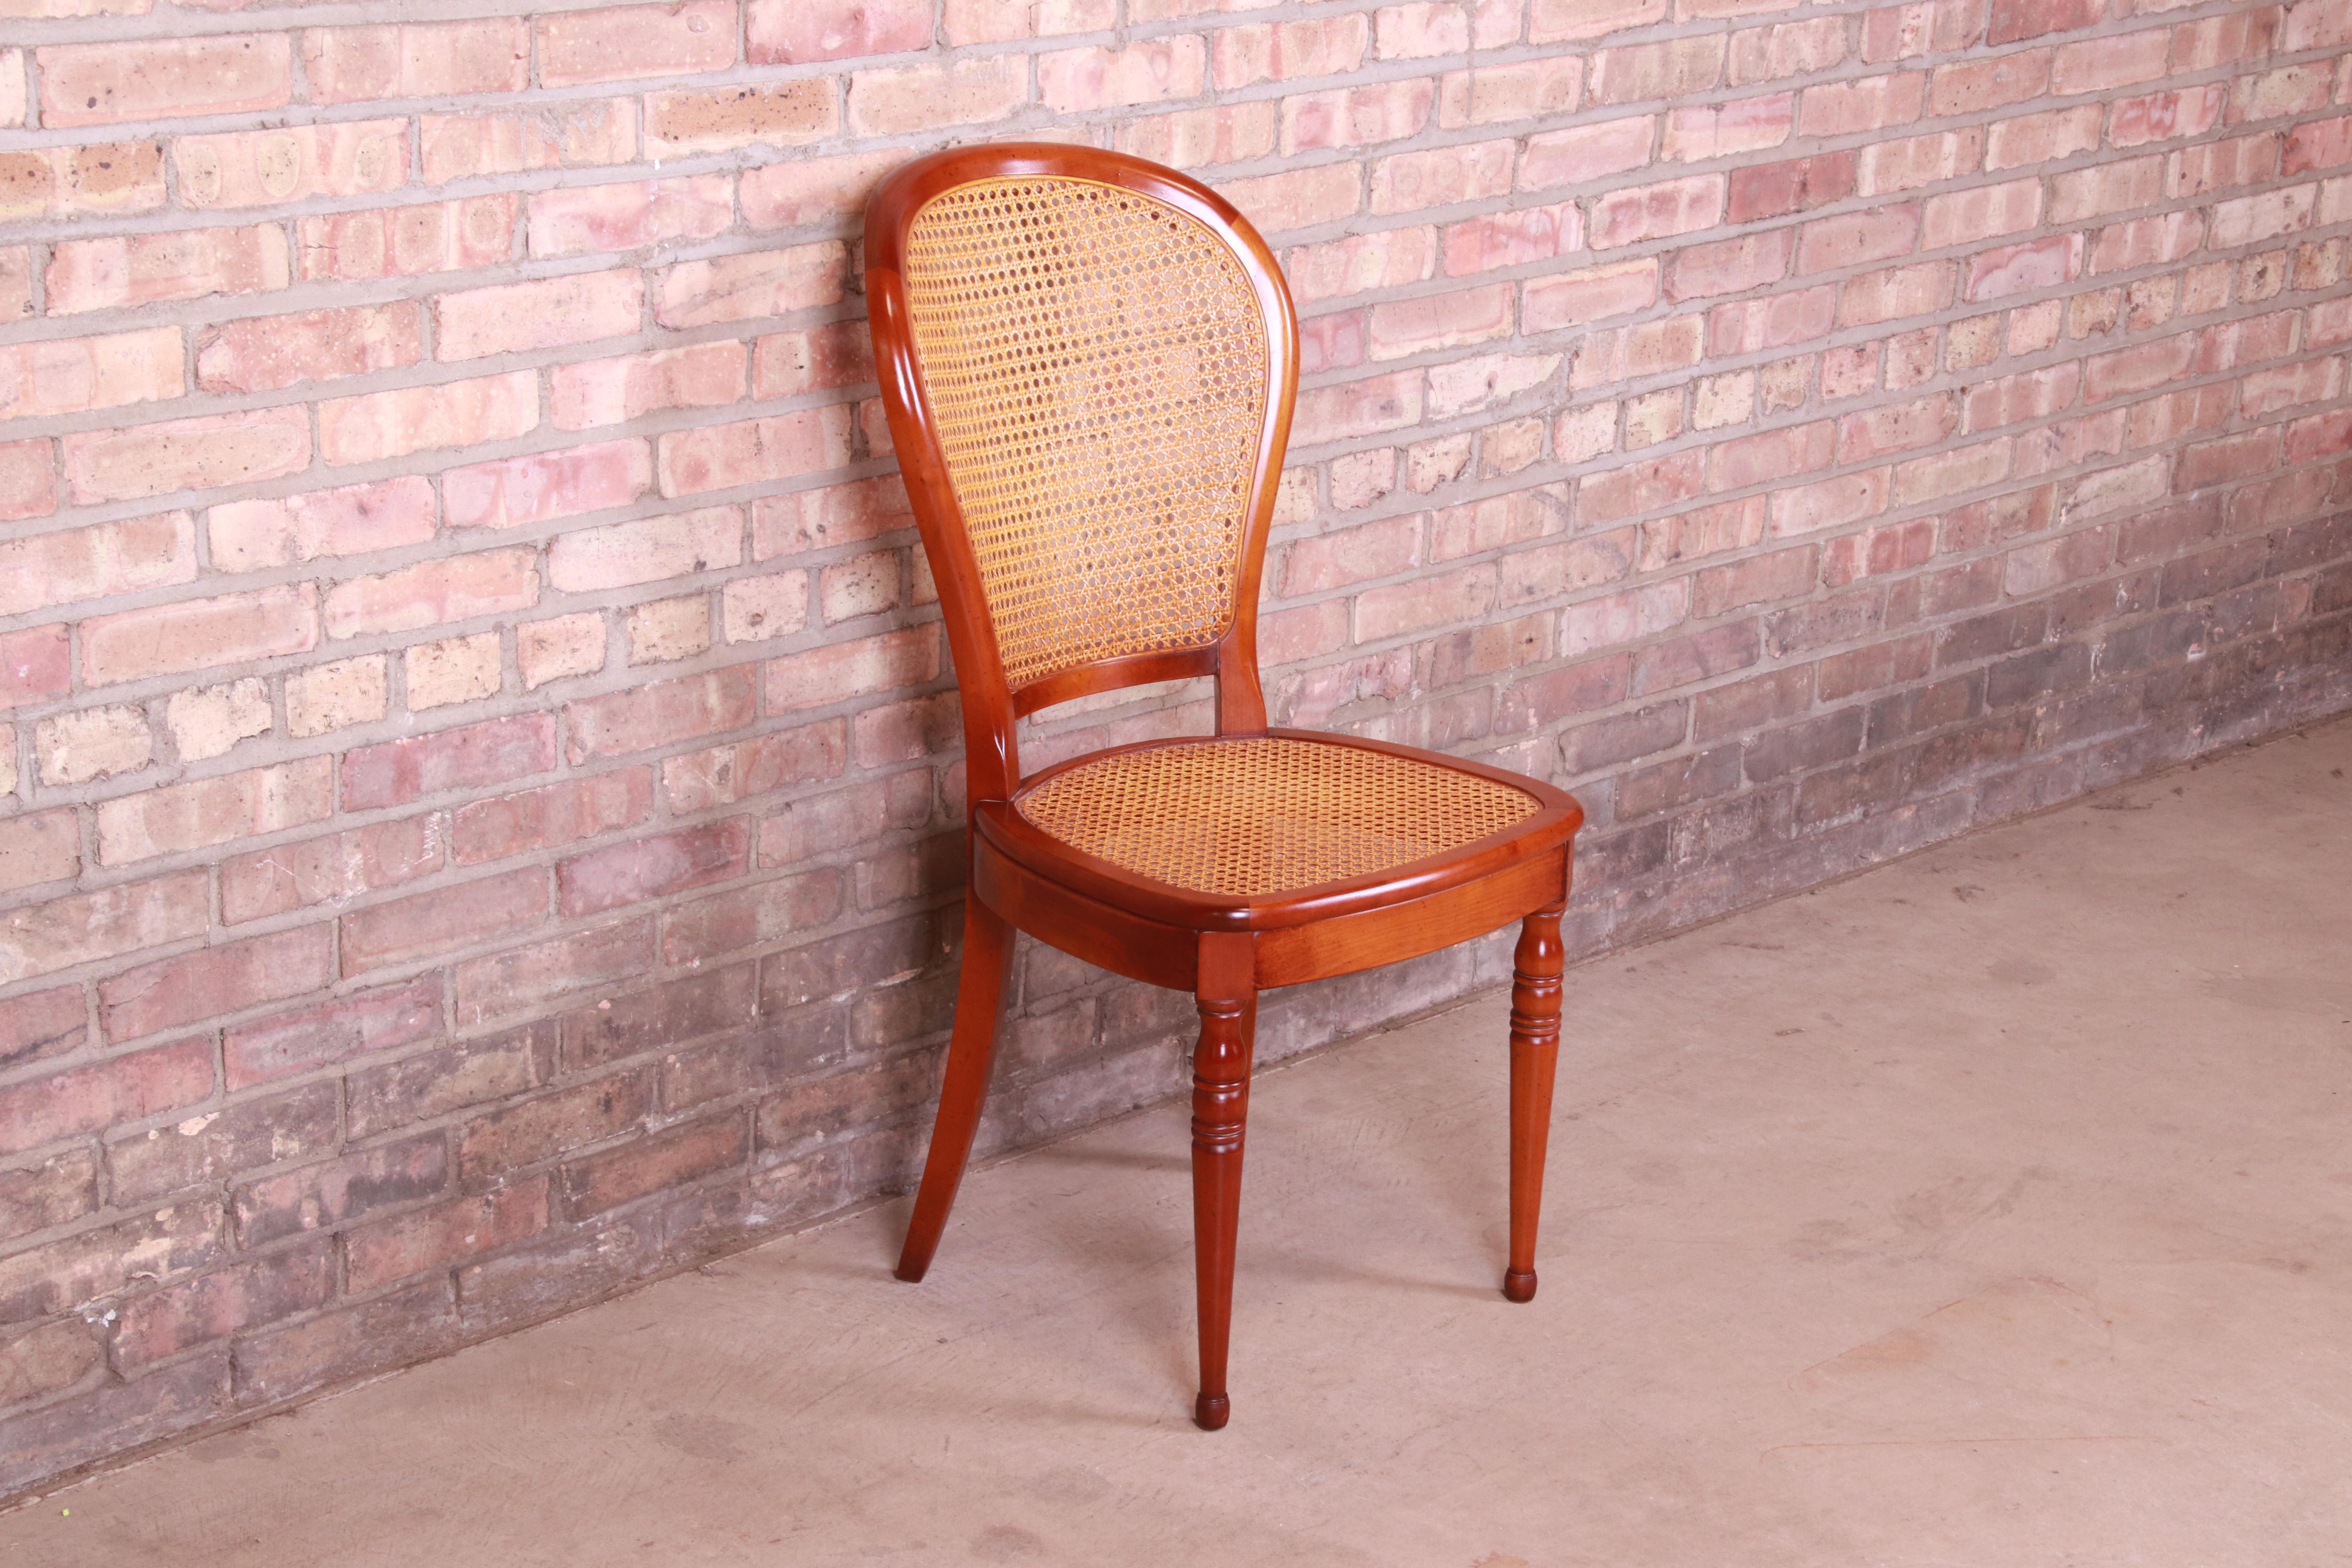 20th Century French Cherry Wood and Cane Balloon Back Desk Chair Attributed to Grange